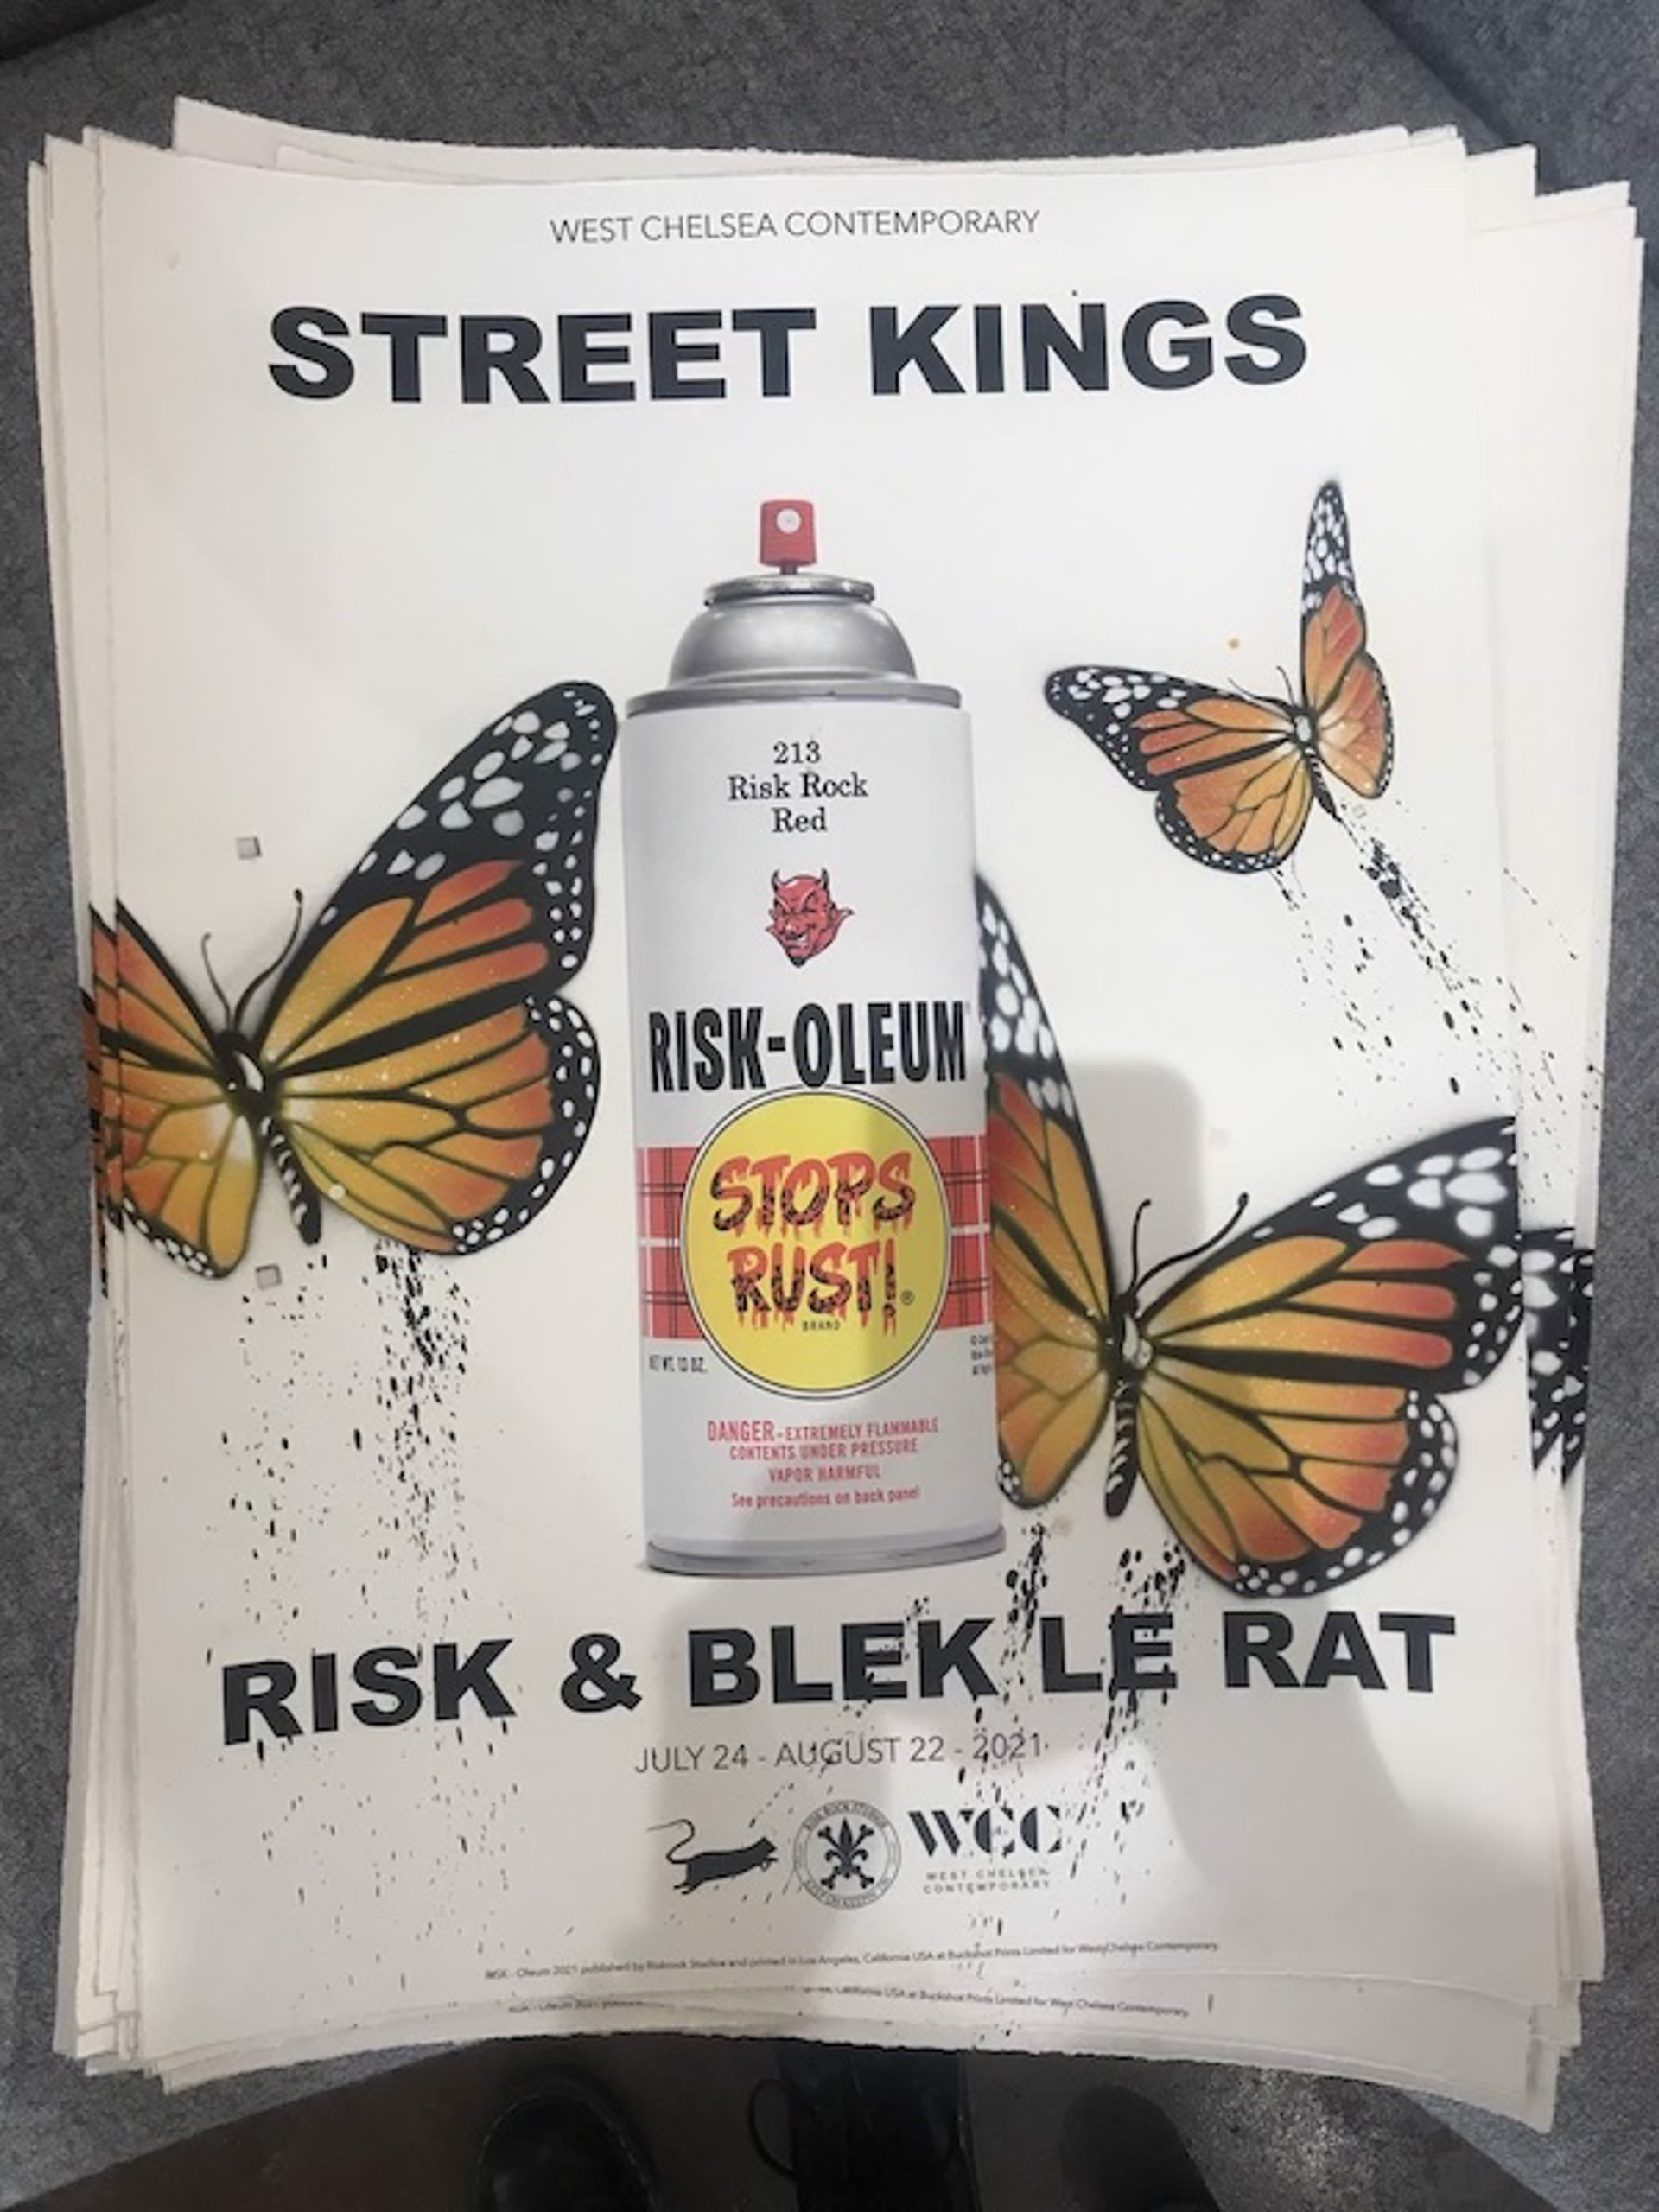 Street Kings Show Print (45/50) by Risk